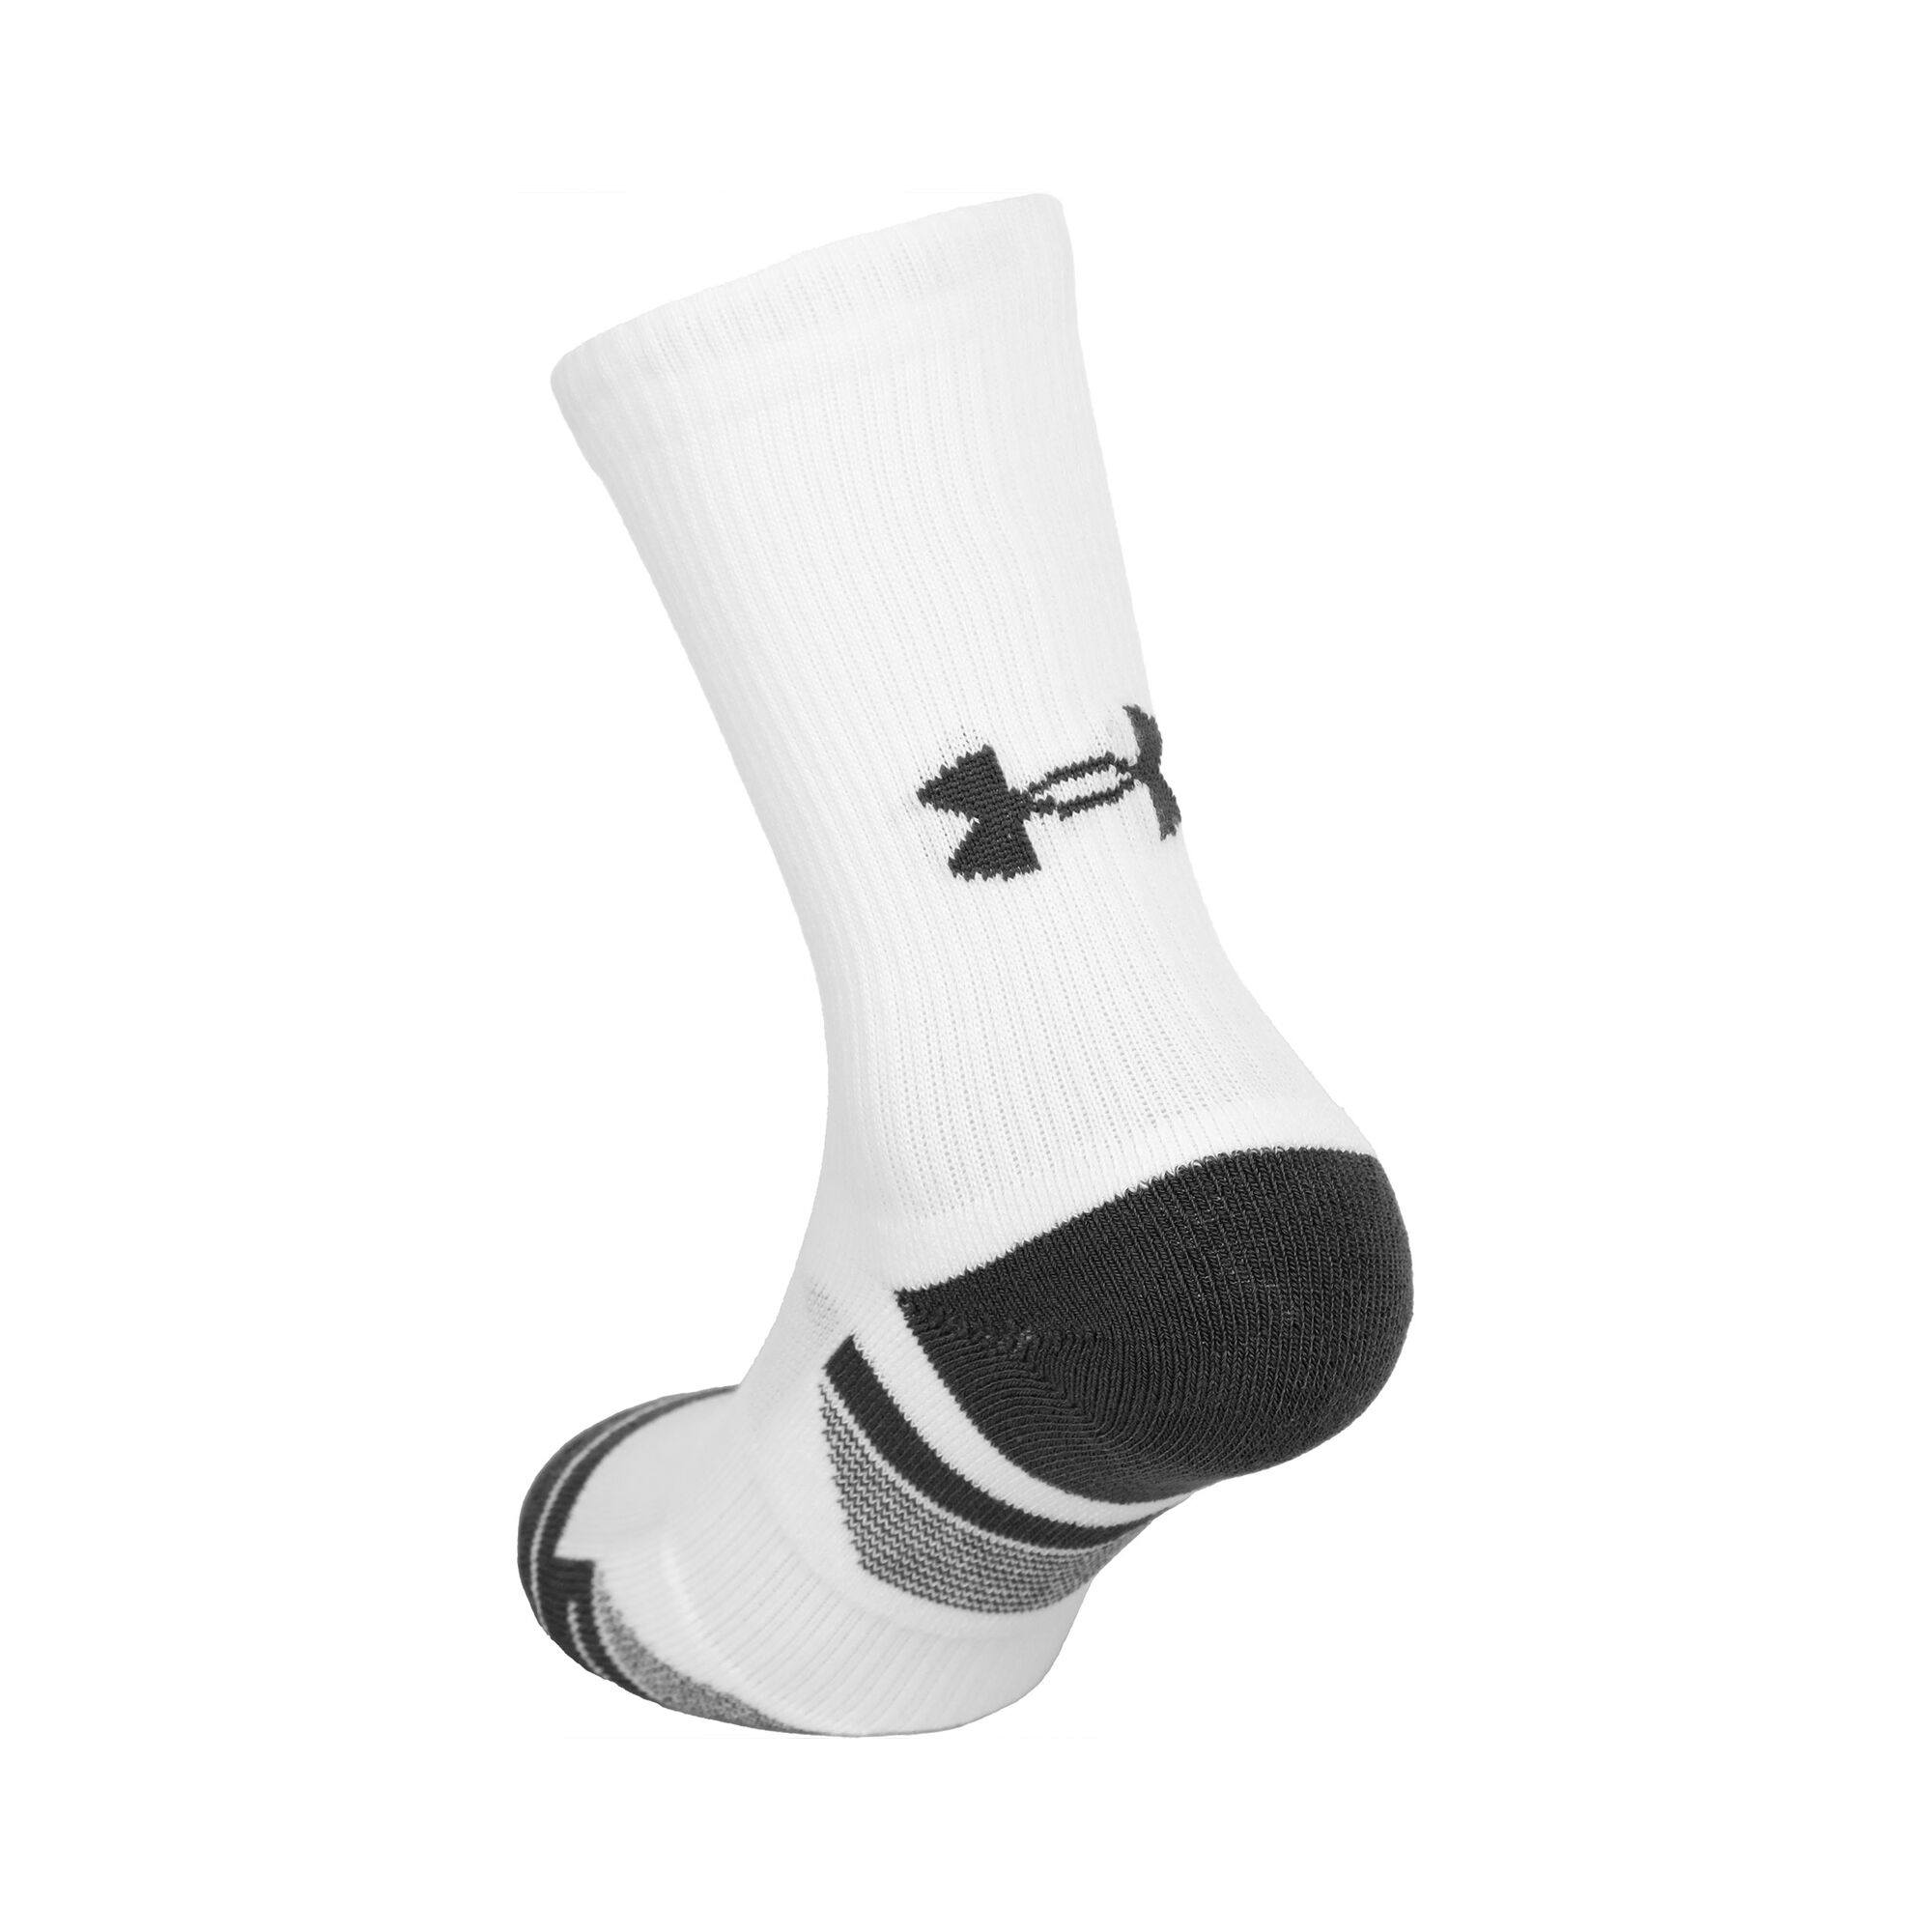 Under Armour Performance Tech Low x 3 Calcetines Tenis White